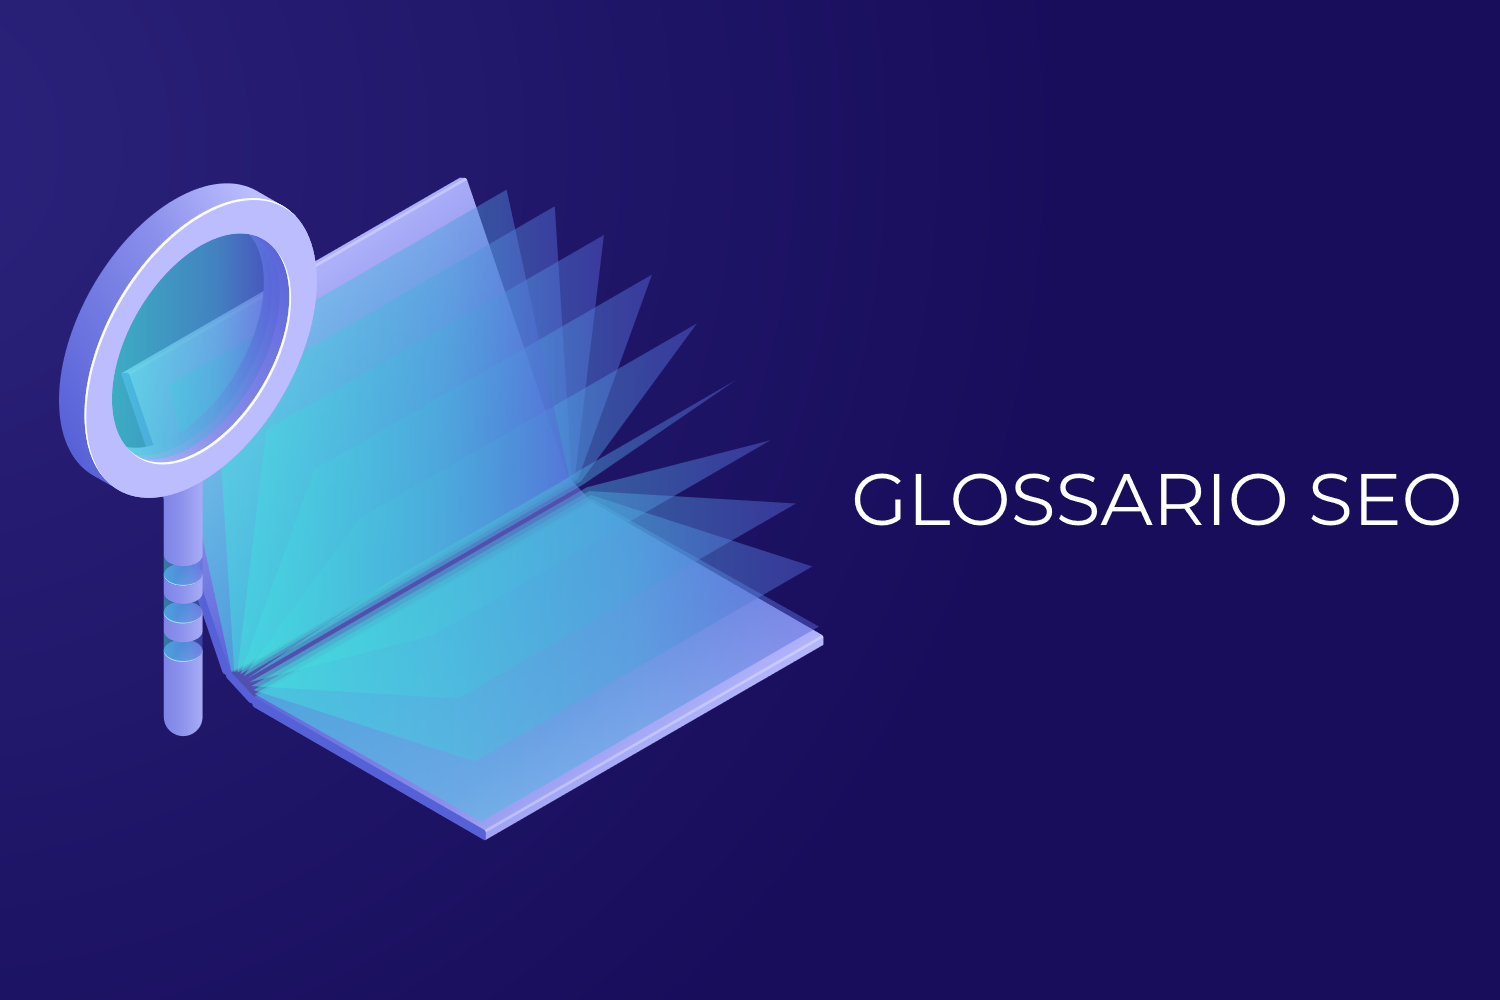 Featured image for “Glossario SEO”